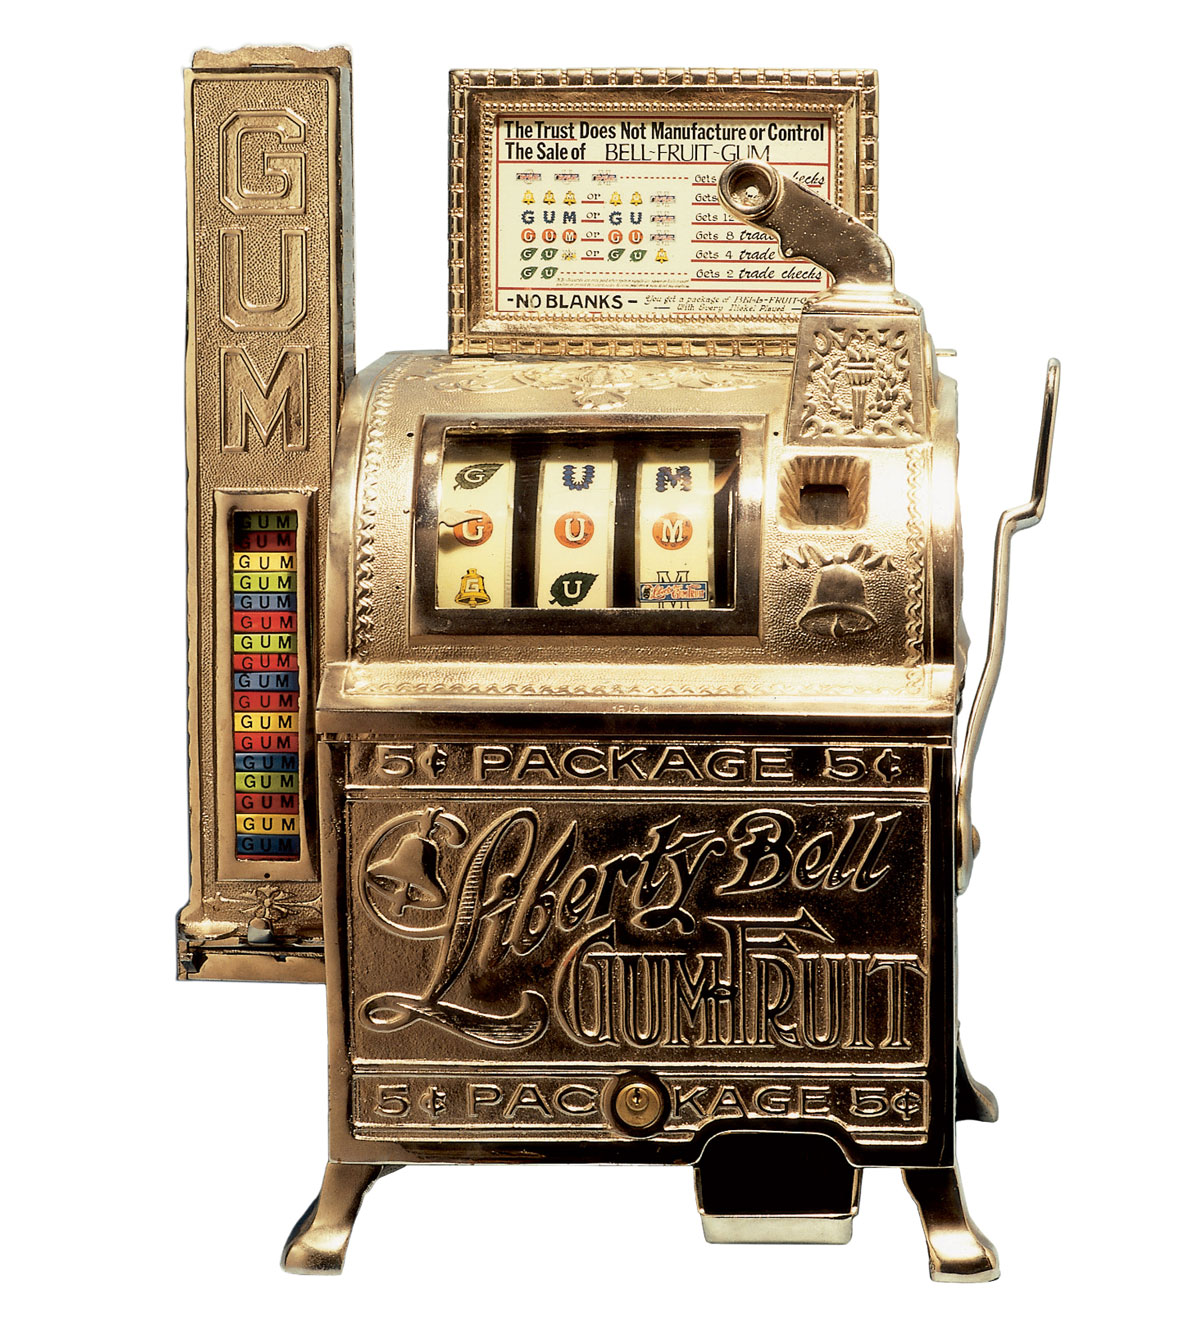 A photograph of a slot machine disguised as vending machine from 1910.